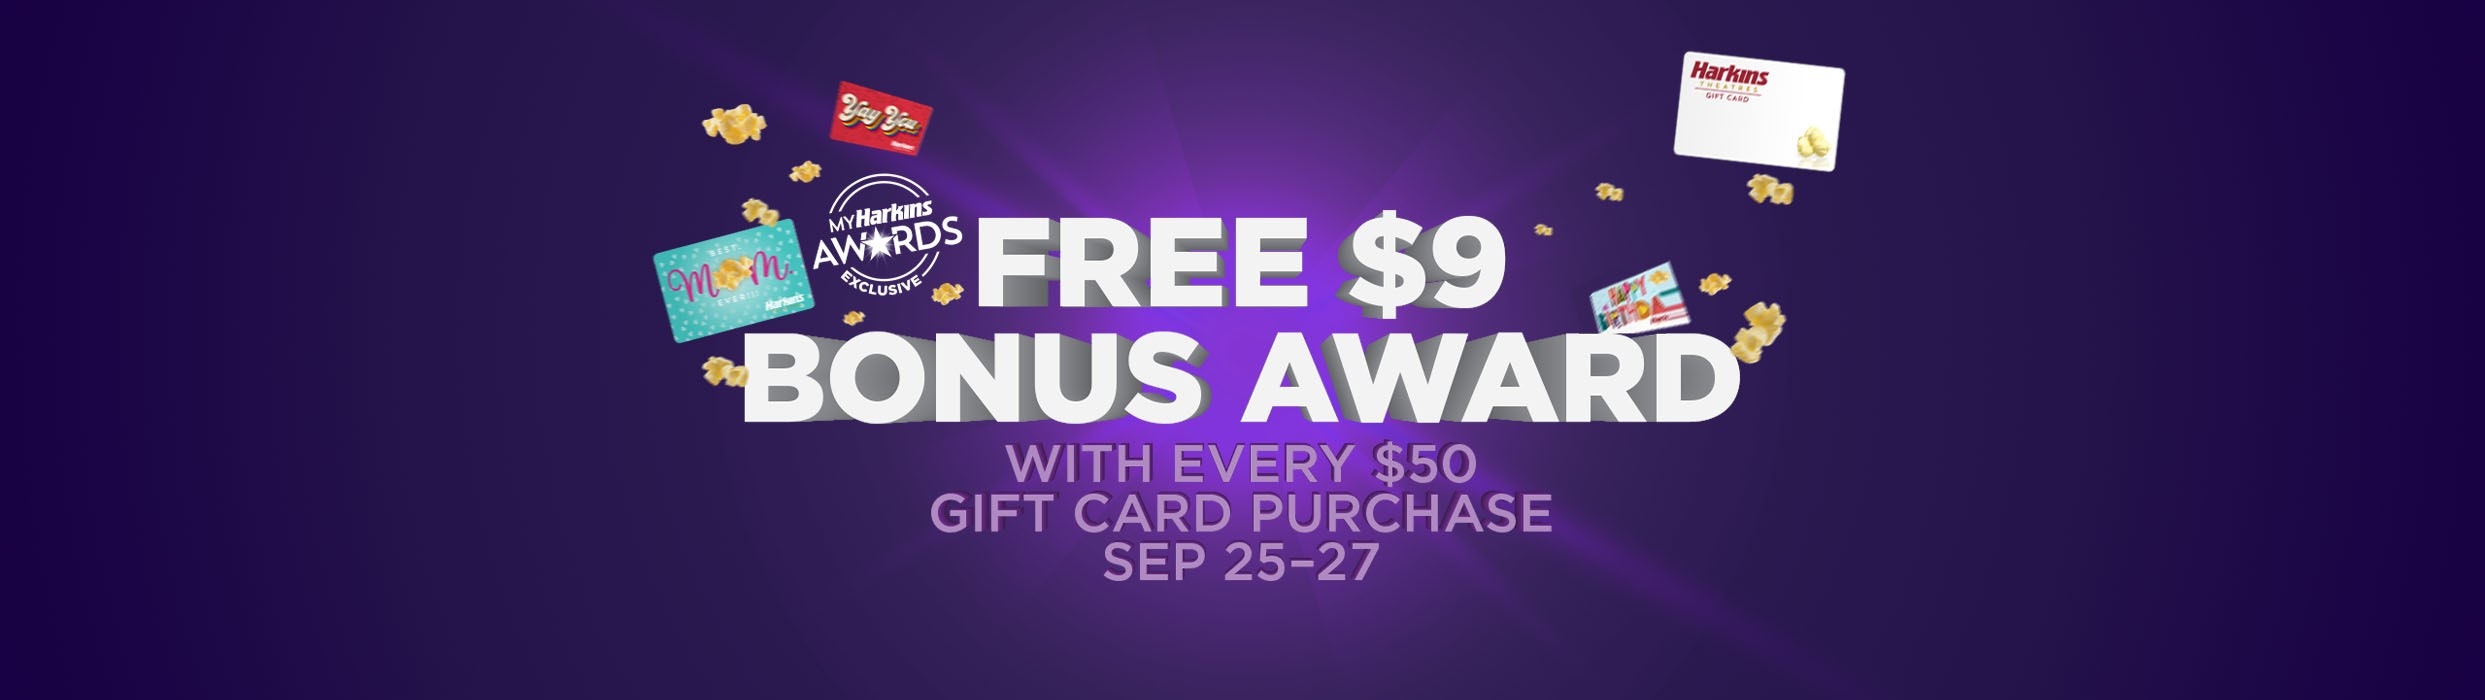 Now until Sept. 27 My Harkins Awards members can receive a free $9 awards for every purchase of a $50 or more gift card to celebrate 90 years of Ultimate Movigoing. 